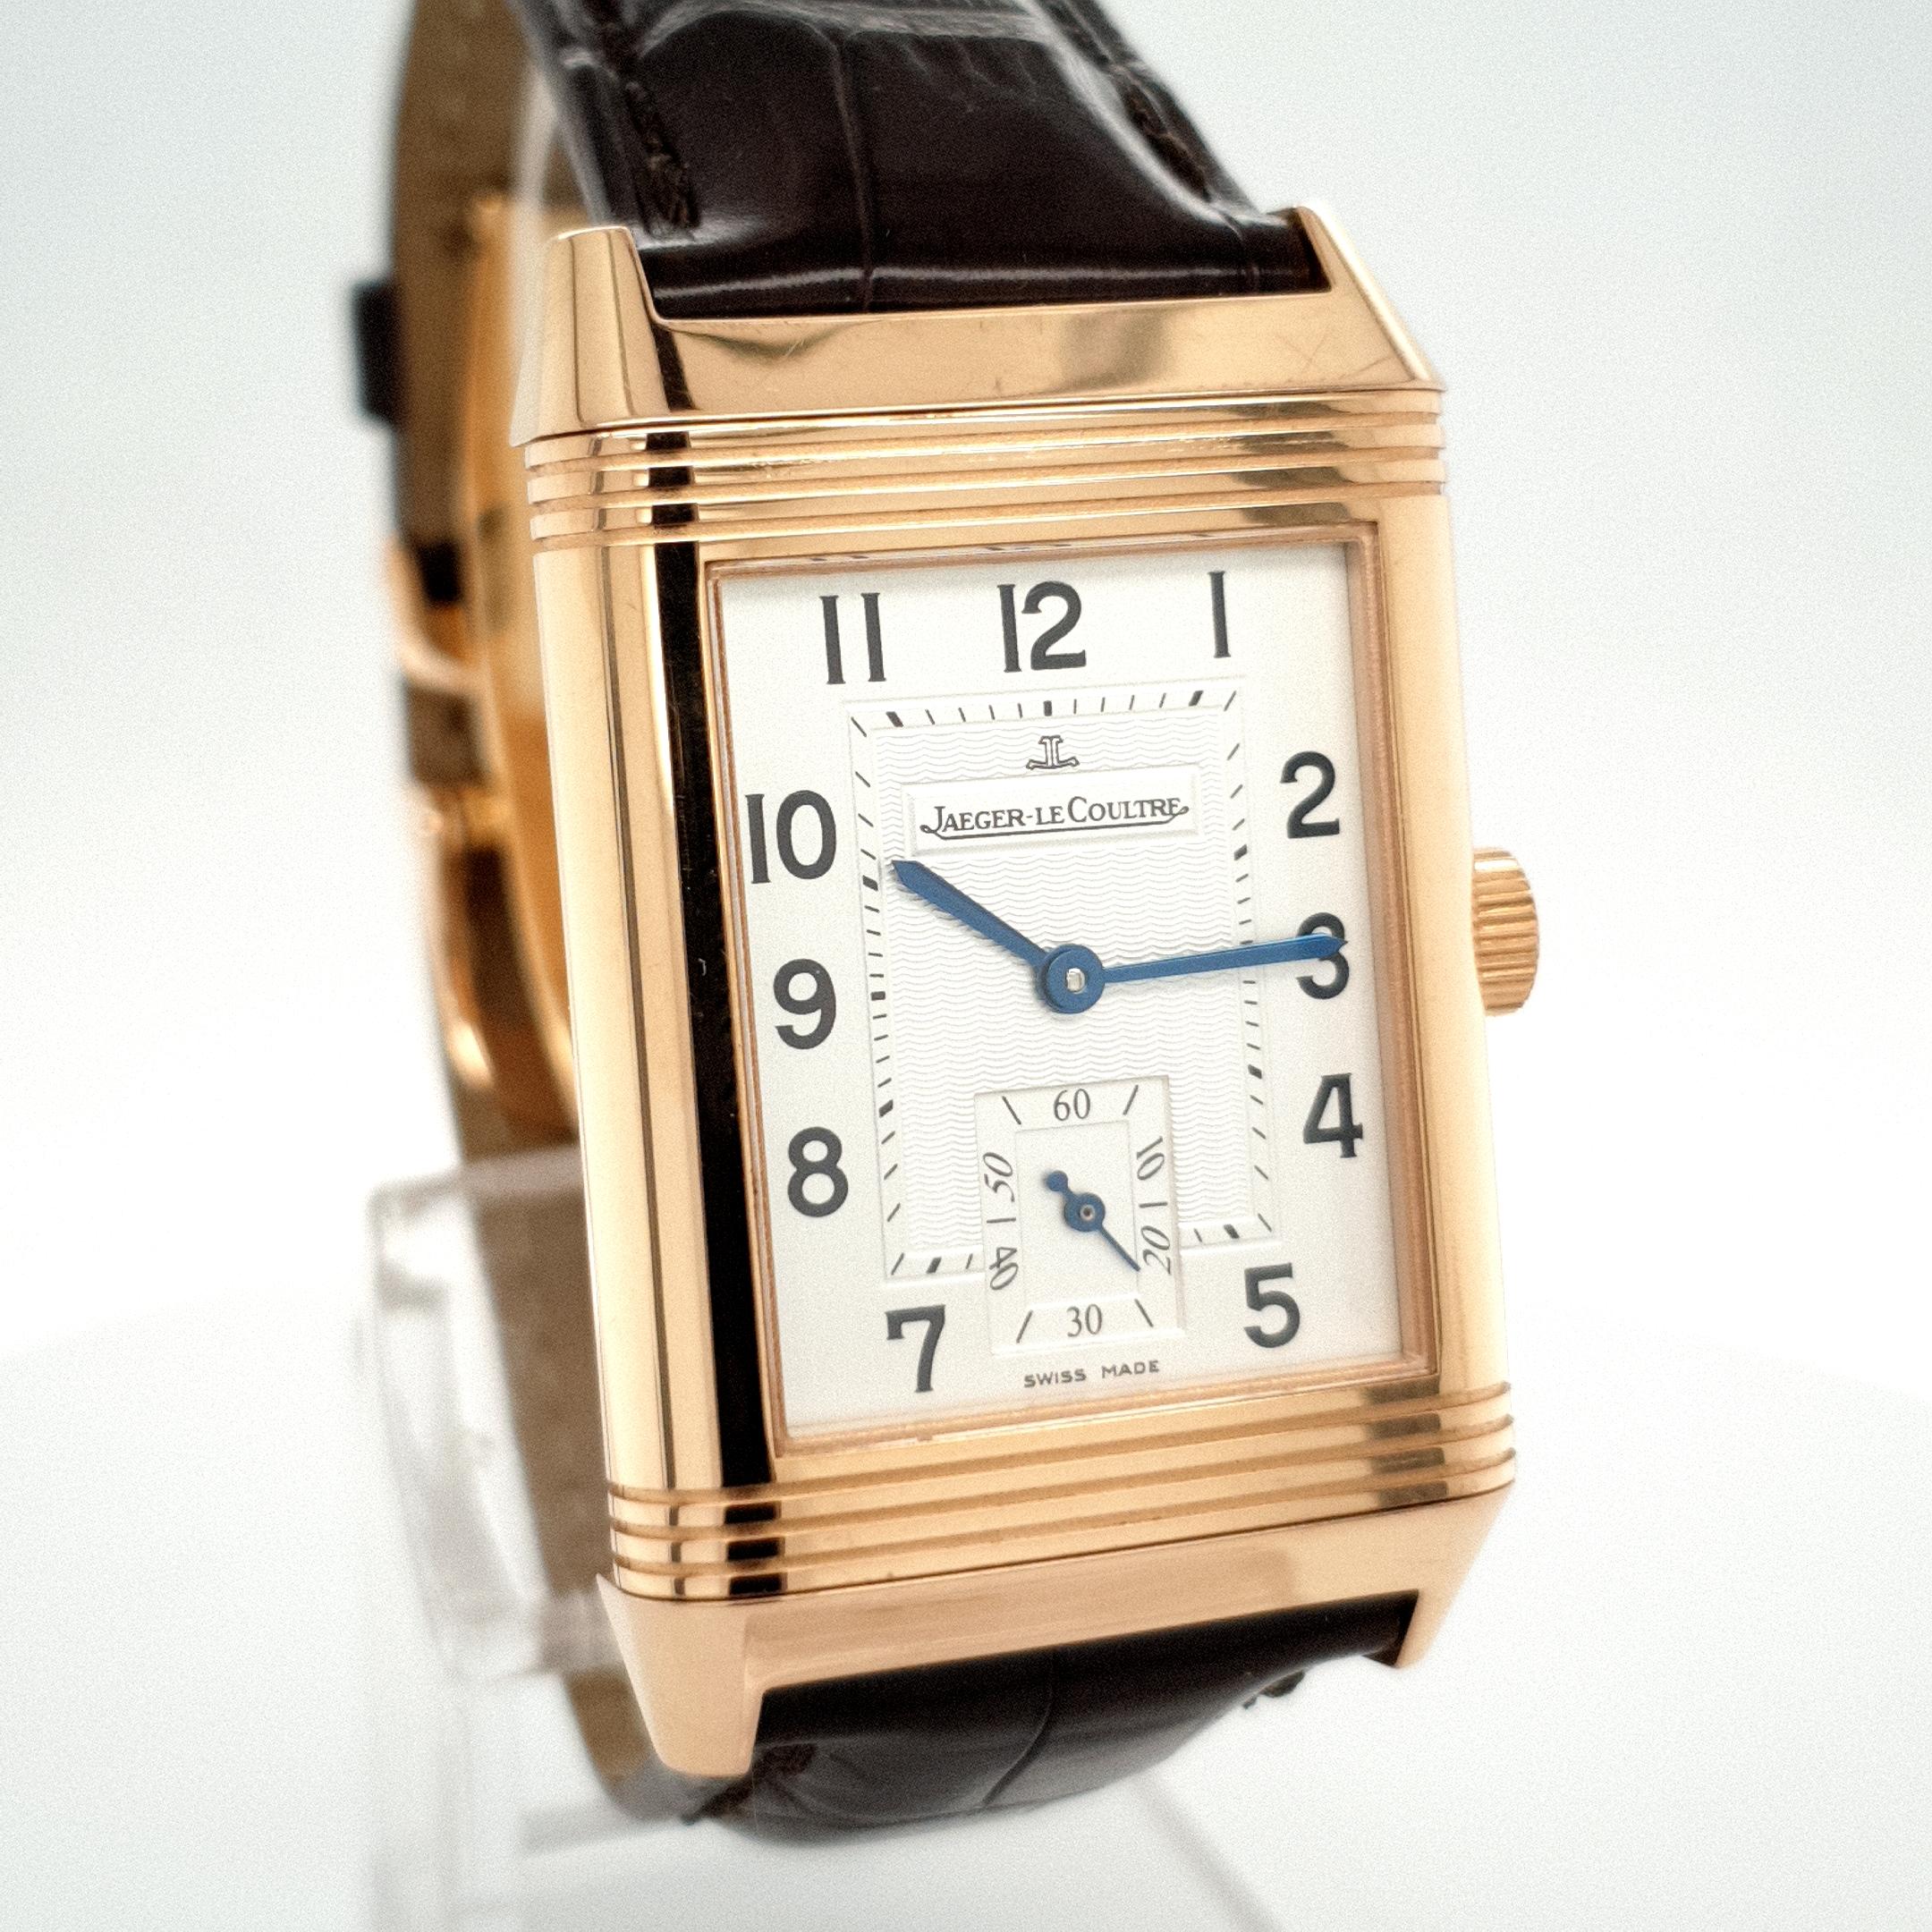 Beautiful 18kt. Rose Gold Jaeger-LeCoultre - Reverso - 1000 hours control-Grande Taille

Condition : Little to no sign of use

Movement: mechanical movement, manual handwinding

Functions: Hours, minutes, seconds

Case: Gold - dimensions: length: